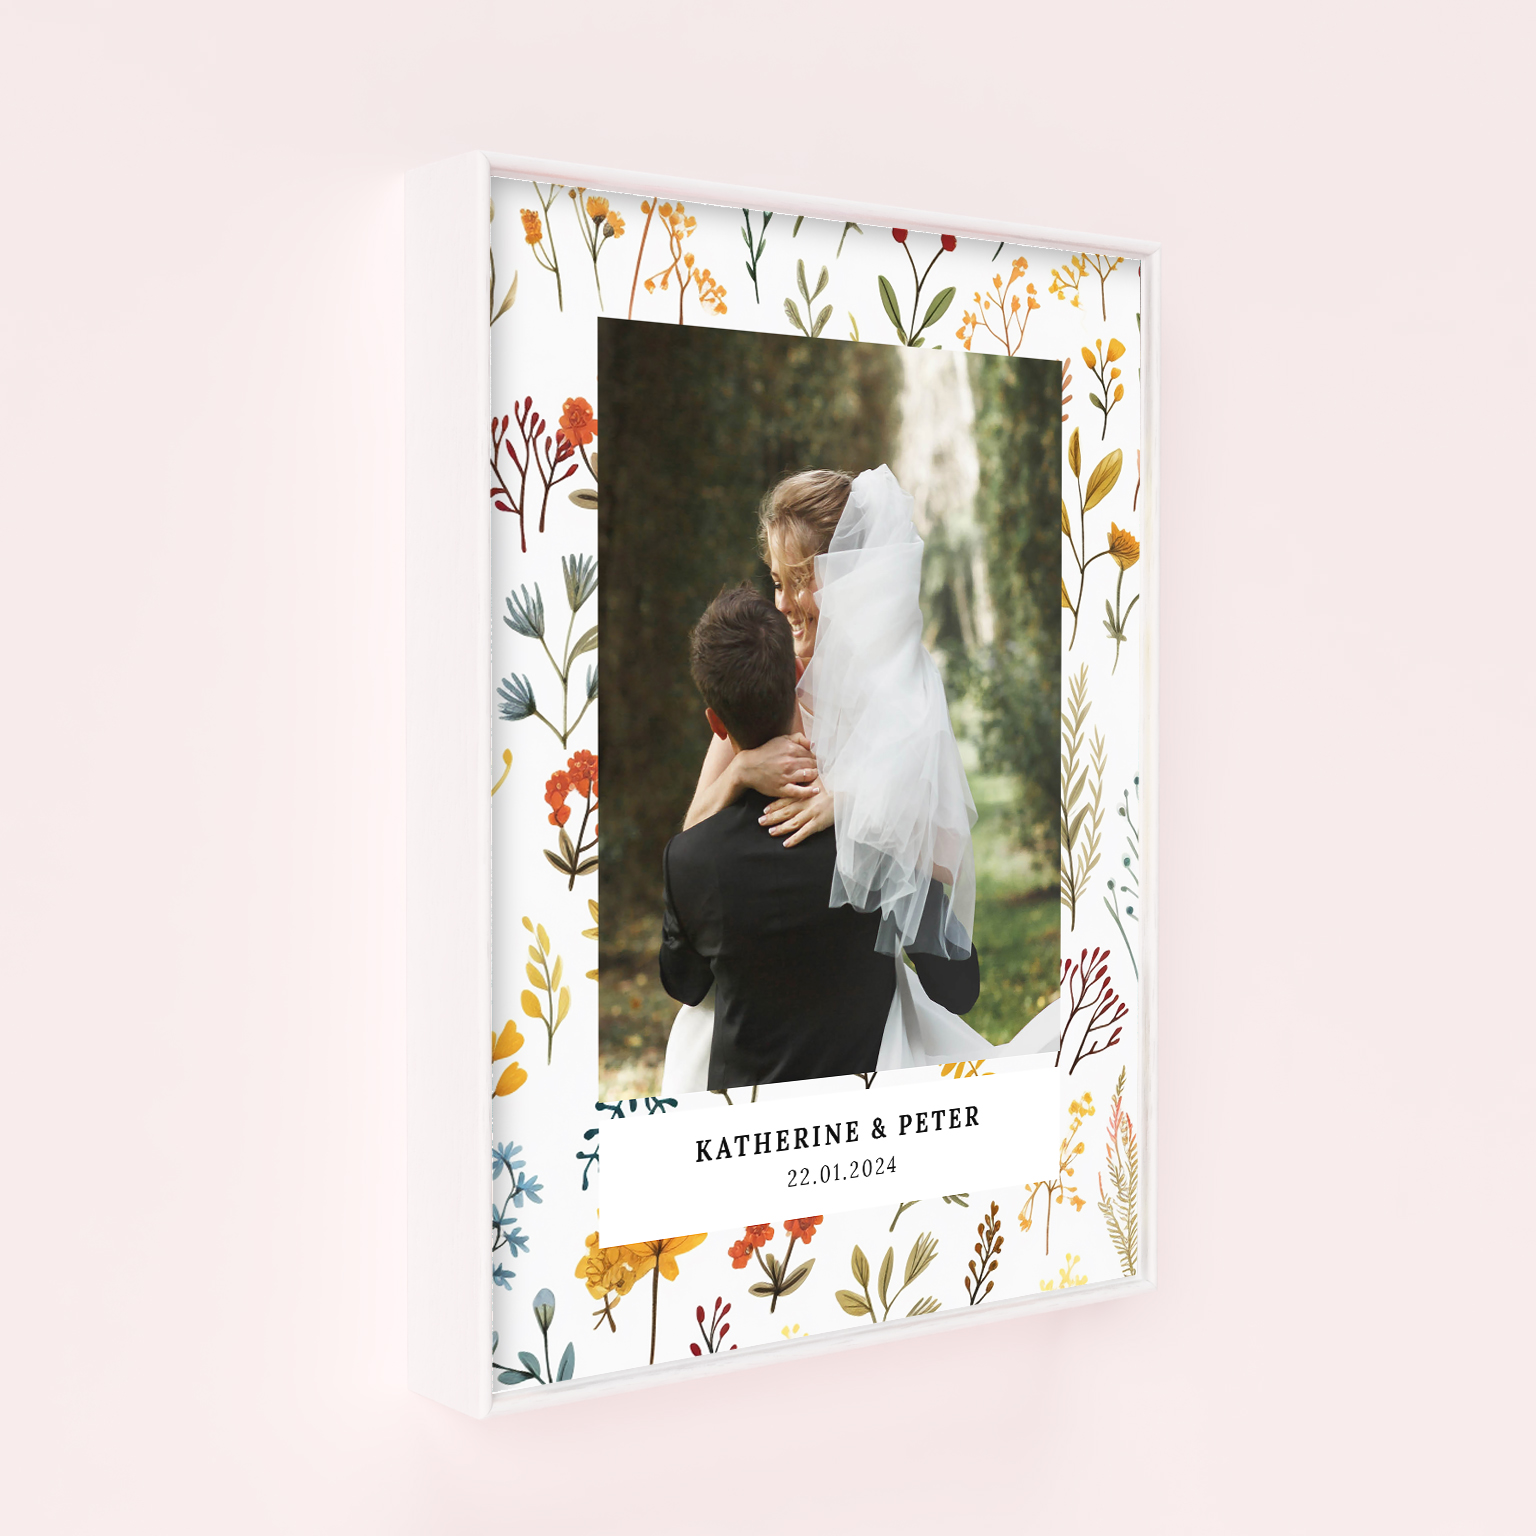 Floral Wedding Waltz Wall Art Framed Print - Celebrate enchanting wedding moments with this portrait-oriented framed print, holding space for one photo. Create a bespoke keepsake by personalizing it with your favorite memories.